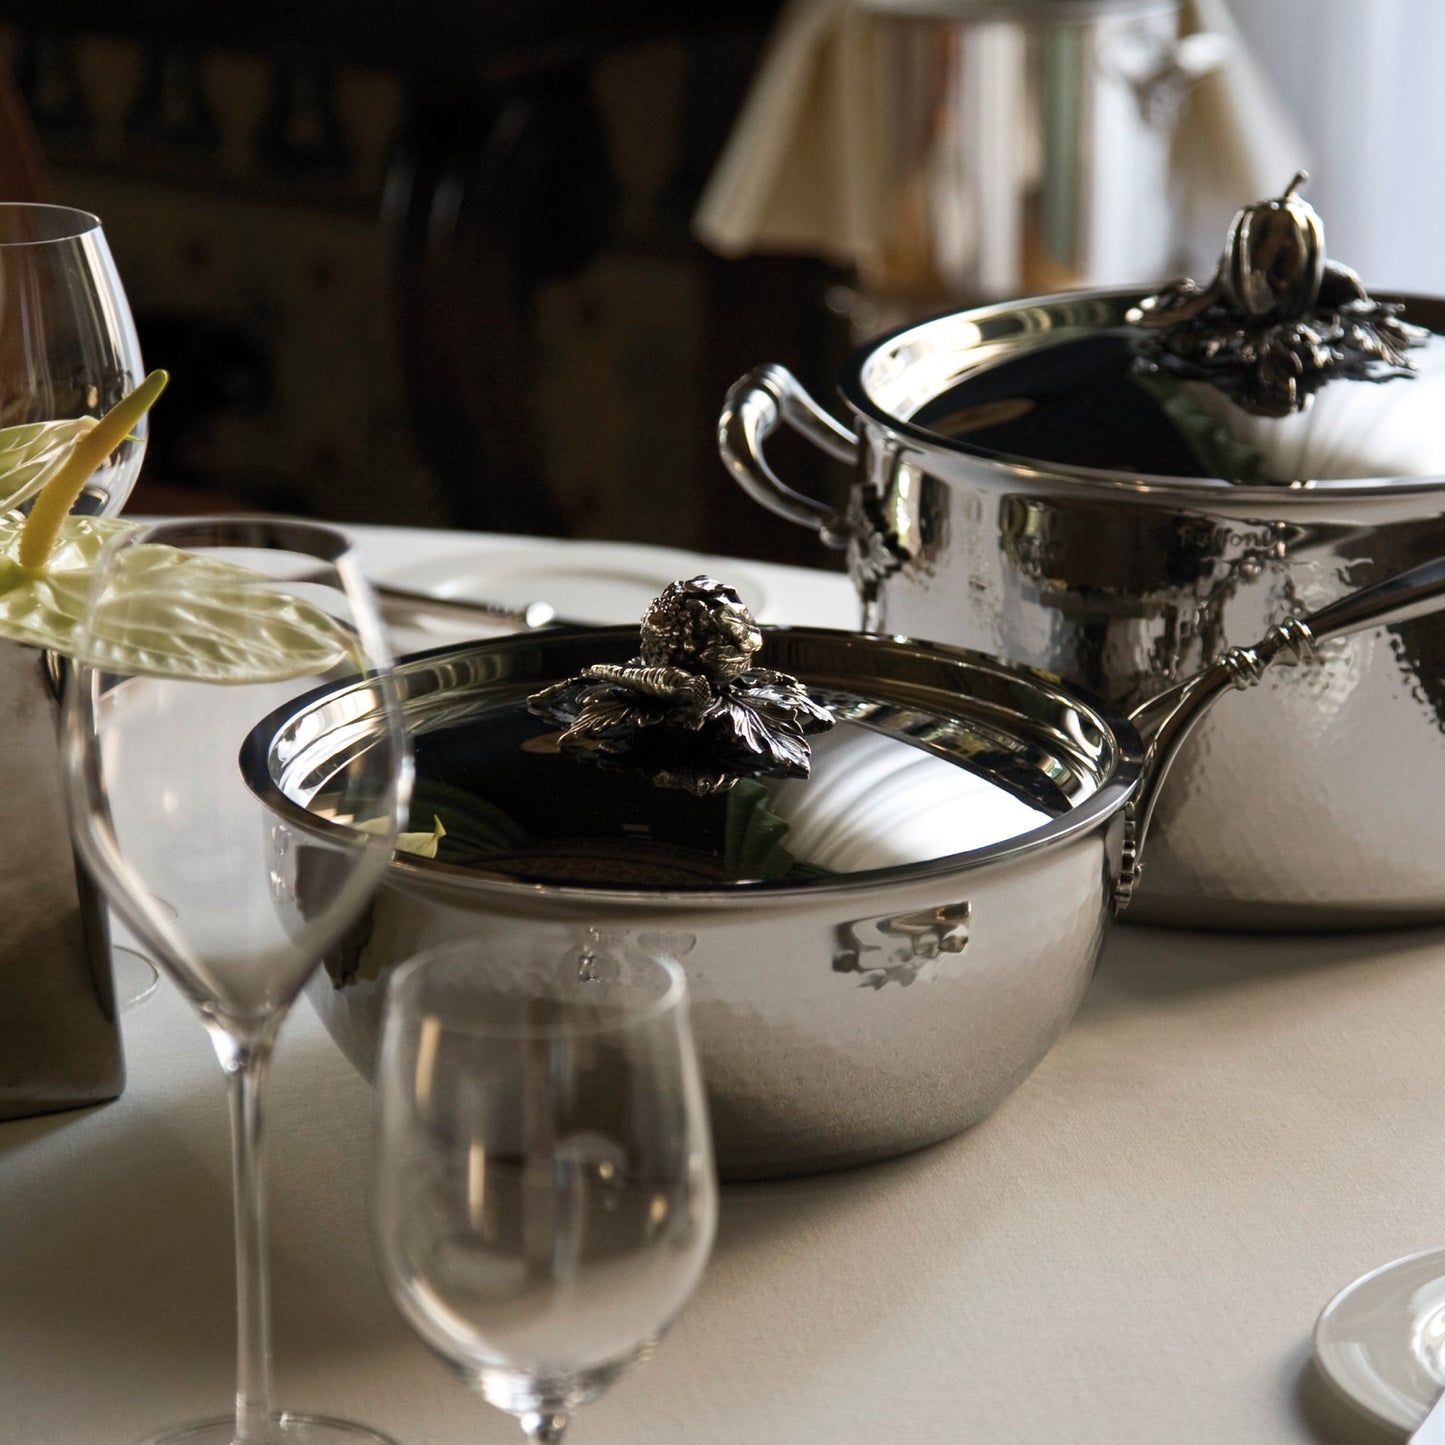 Opus Prima hammered clad stainless steel chefs pan with decorated silver-plated lid knob finial from Ruffoni on a classic tablesetting